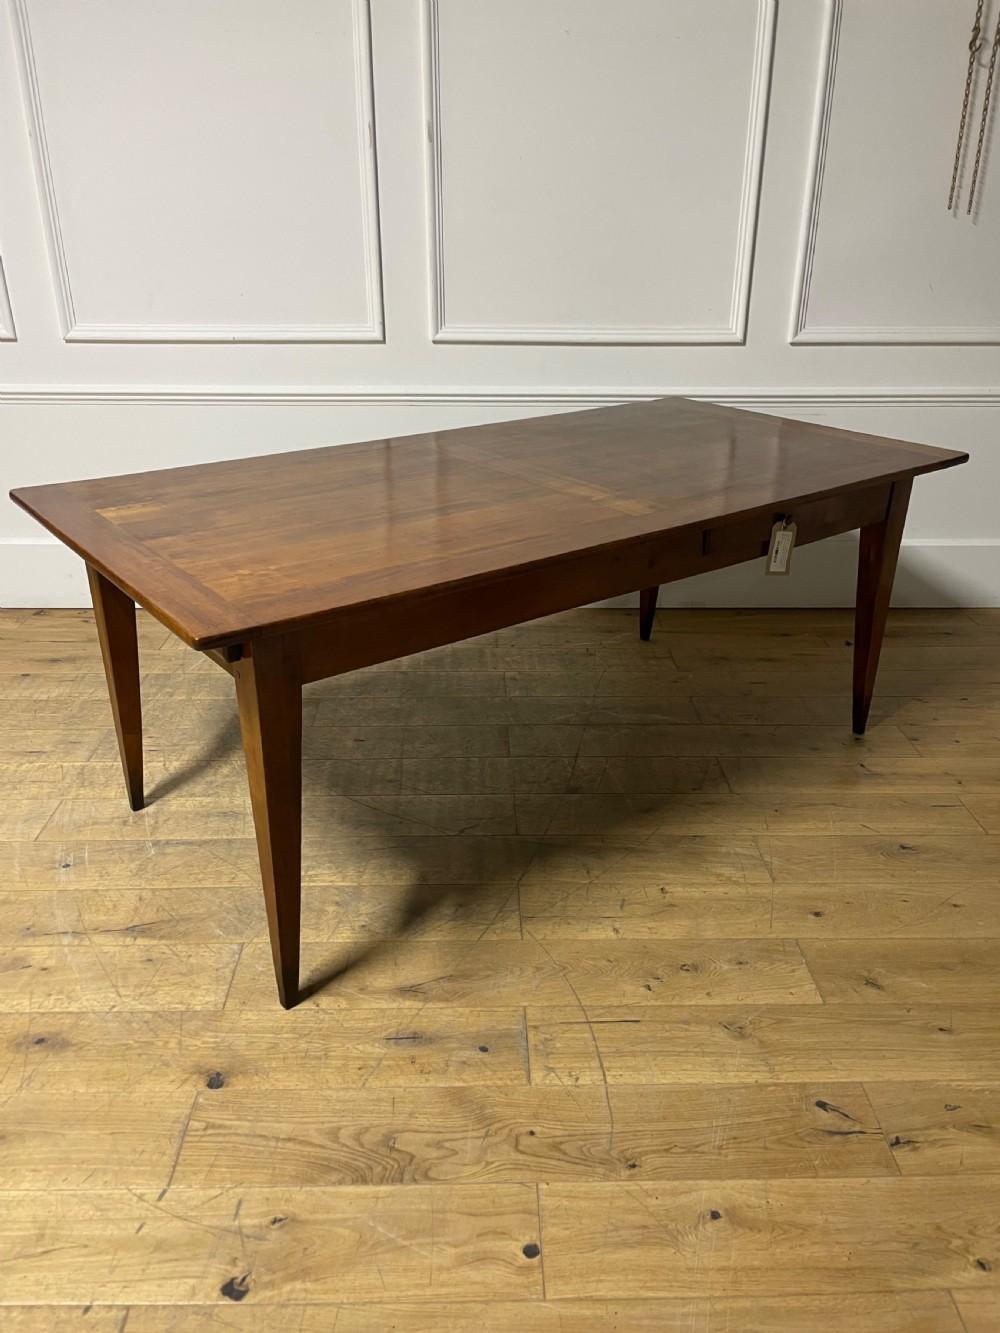 Great example of an early 20th century cherrywood farm house table , French circa 1920’s standing on tapered legs with a large bread slide and small drawer to the side
Will seat 6-8 people , nice wide top
Length 198 cms or 78 inches
Width 100 cms or